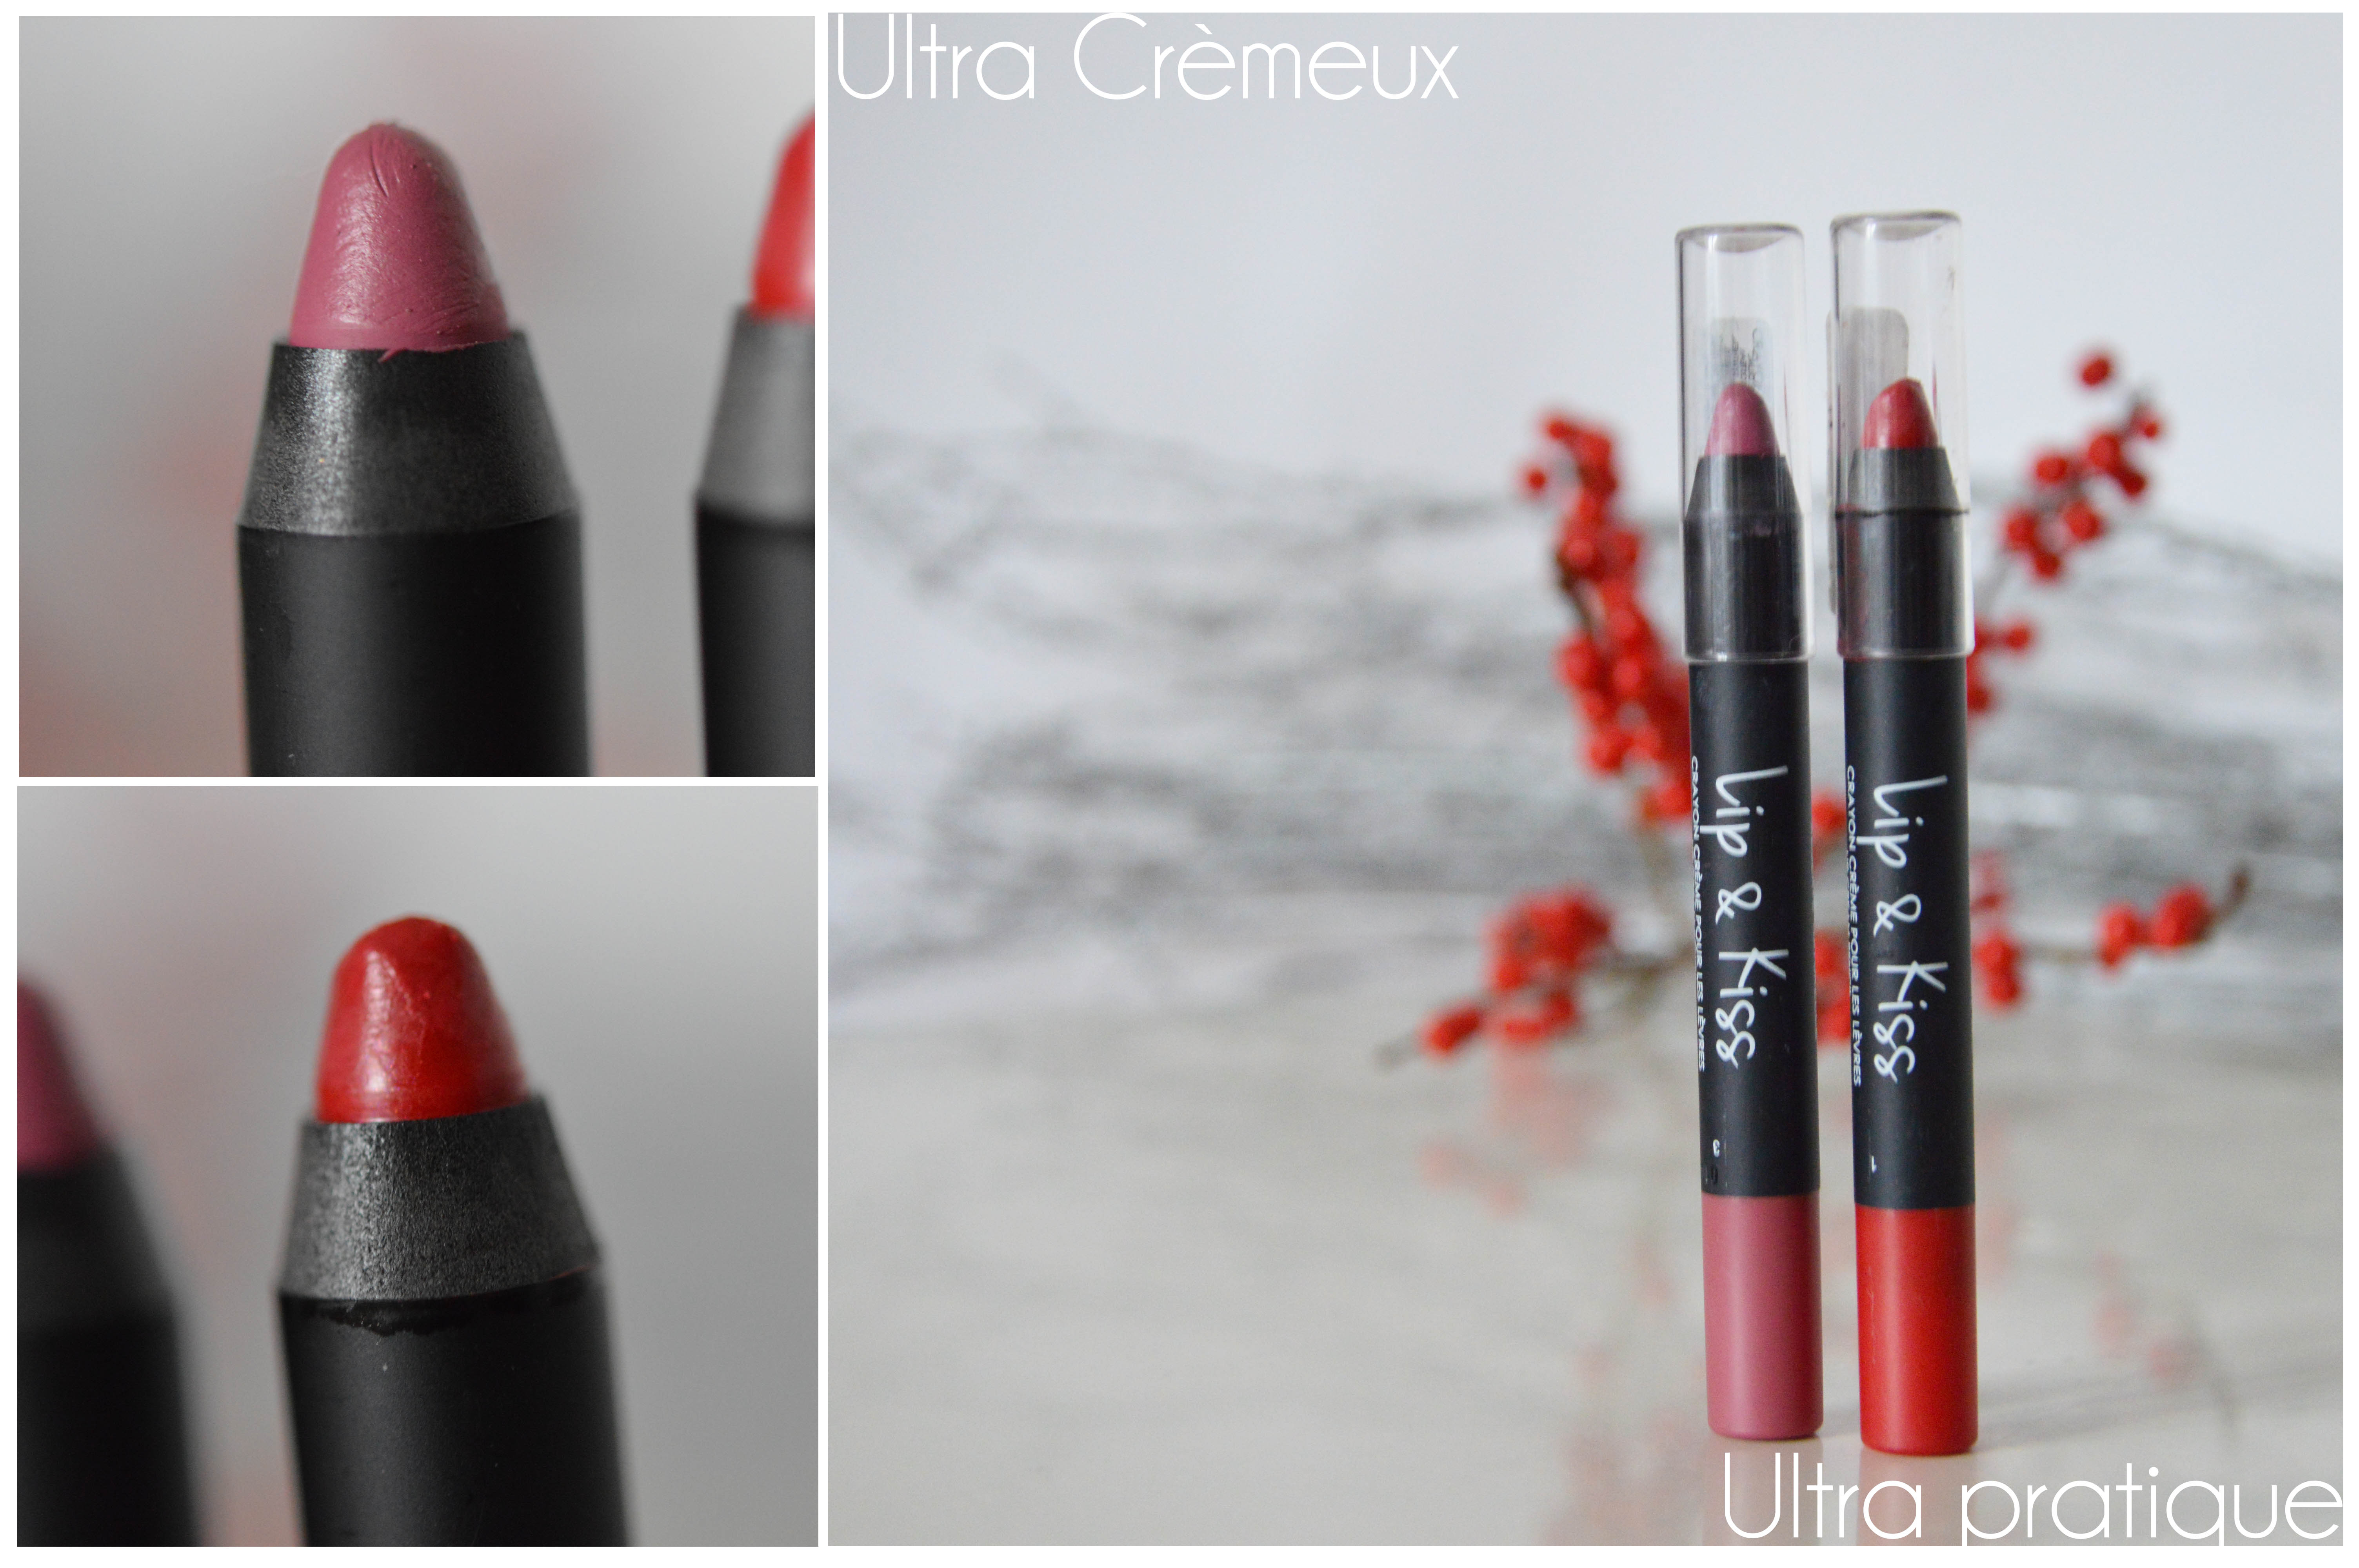 ALITTLEB_BLOG_BEAUTE_RESERVE_NATURELLE_LIP_AND_KISS_ROSE_AND_WOOD_ROCK_AND_RED-ZOOM_EMBOUTS